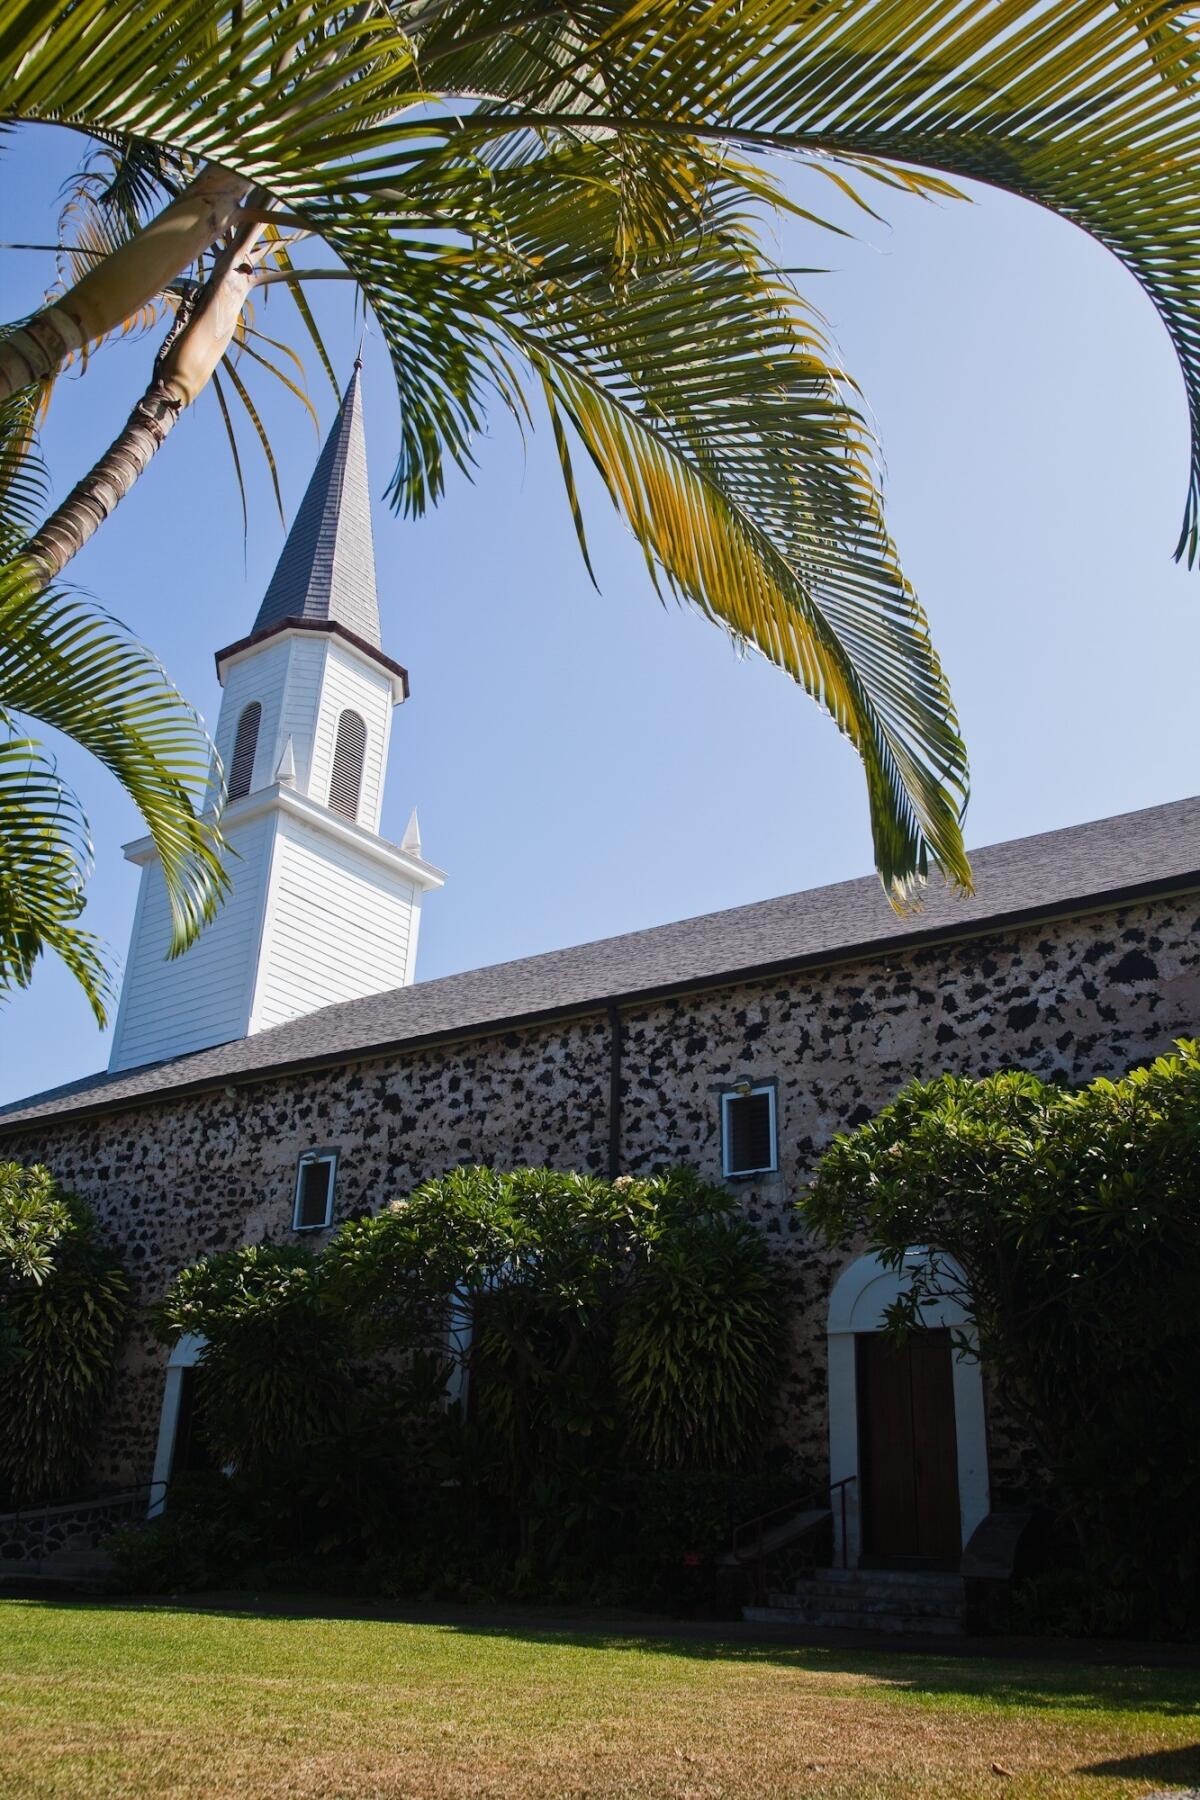 The Mokuaikaua Church in Kailua is among the oldest Christian houses of worship in the islands.